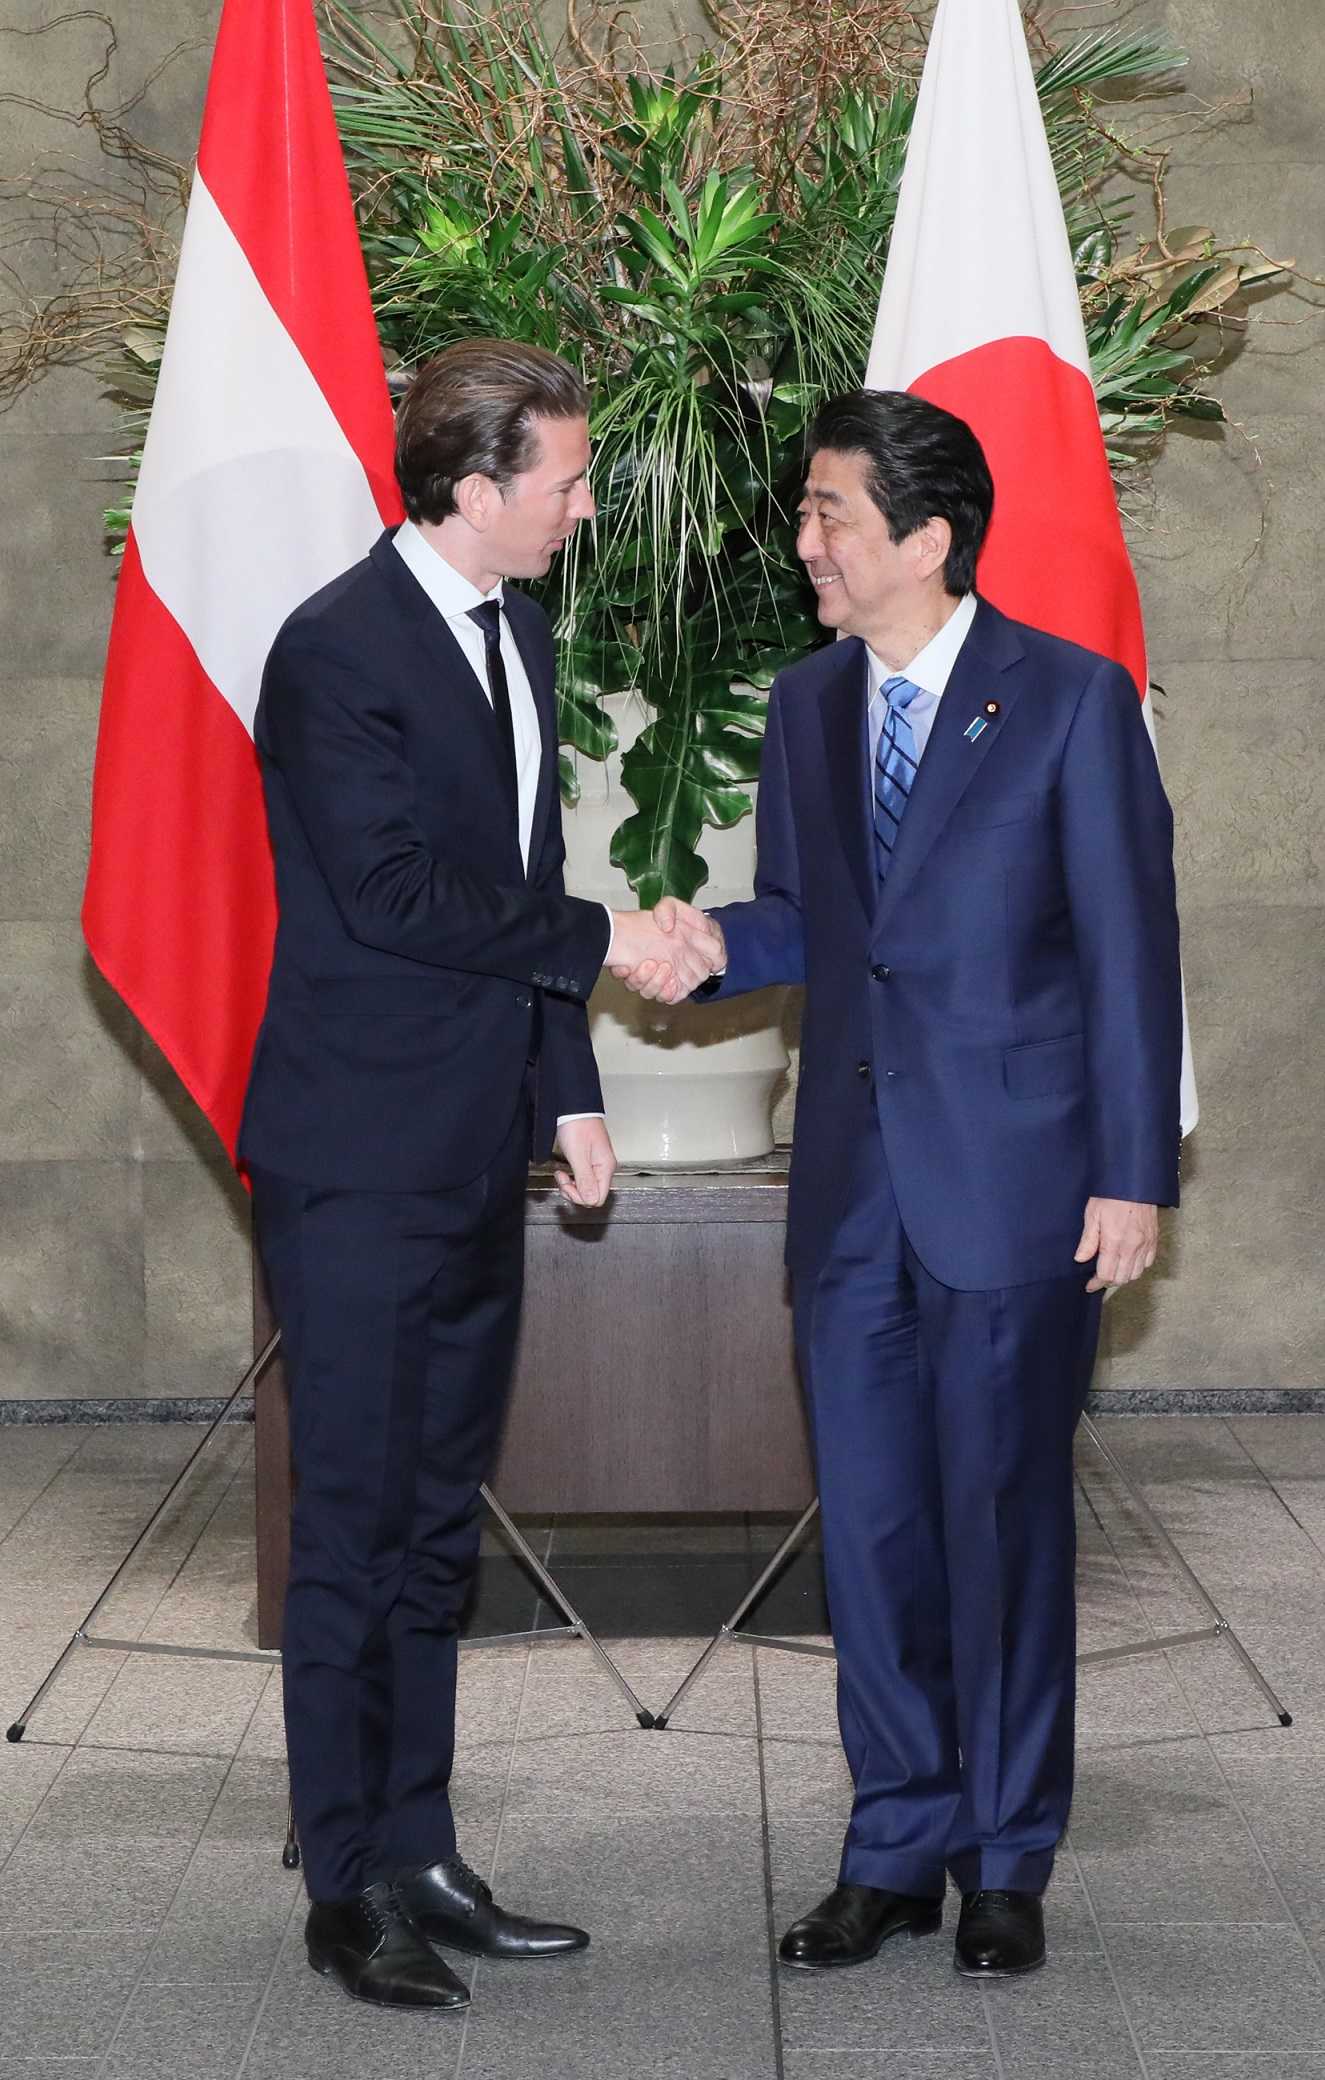 Photograph of the Prime Minister welcoming the Chancellor of Austria